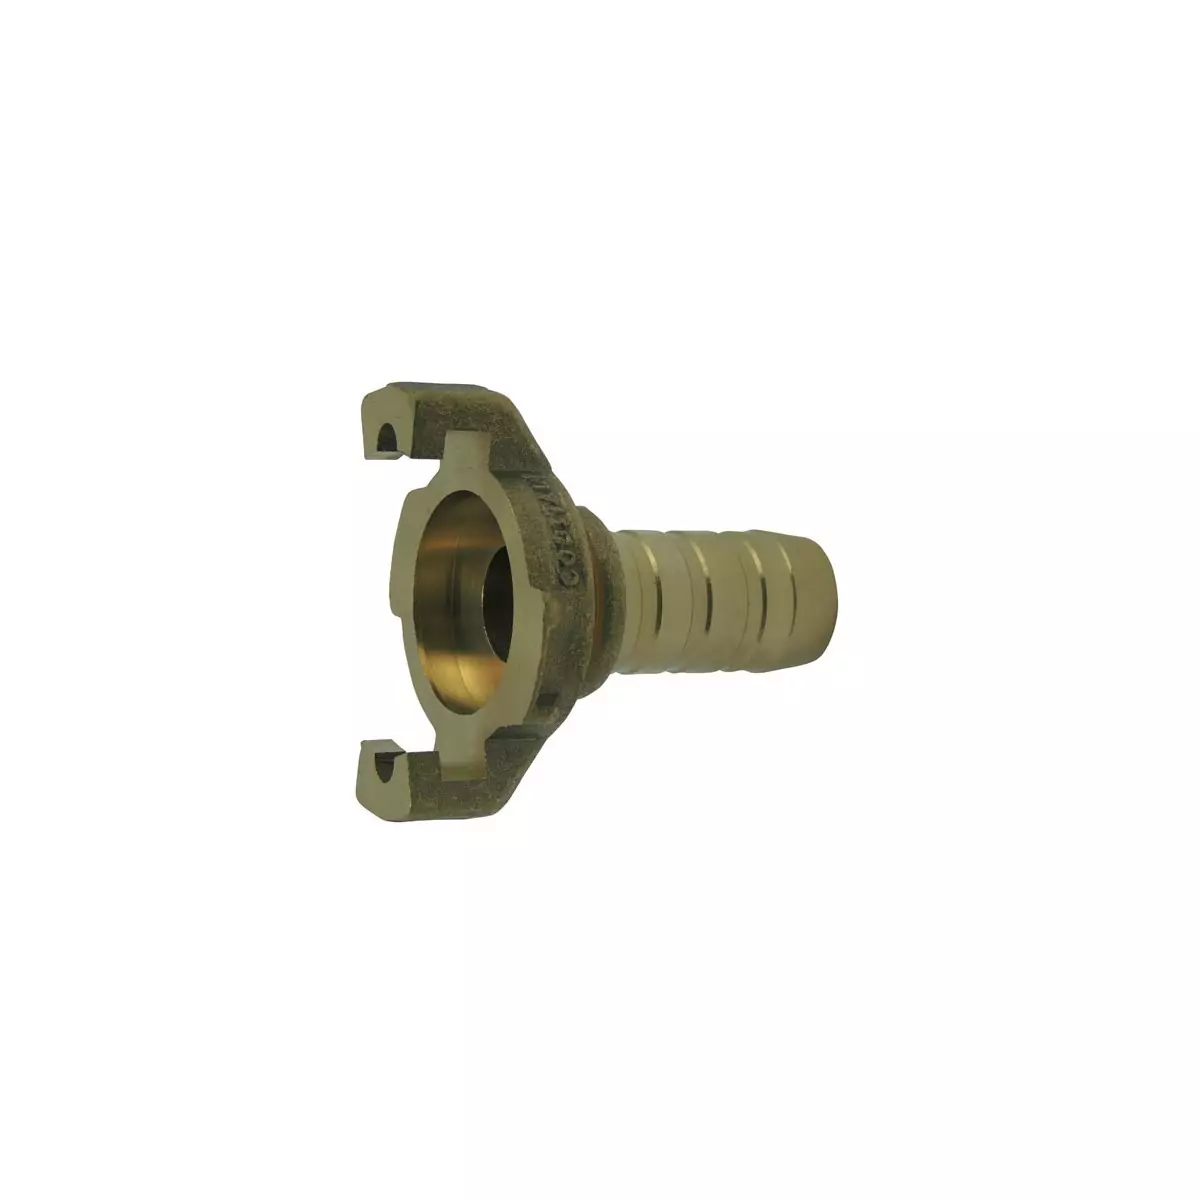 Express coupling with machined fluted shank with flange without seal